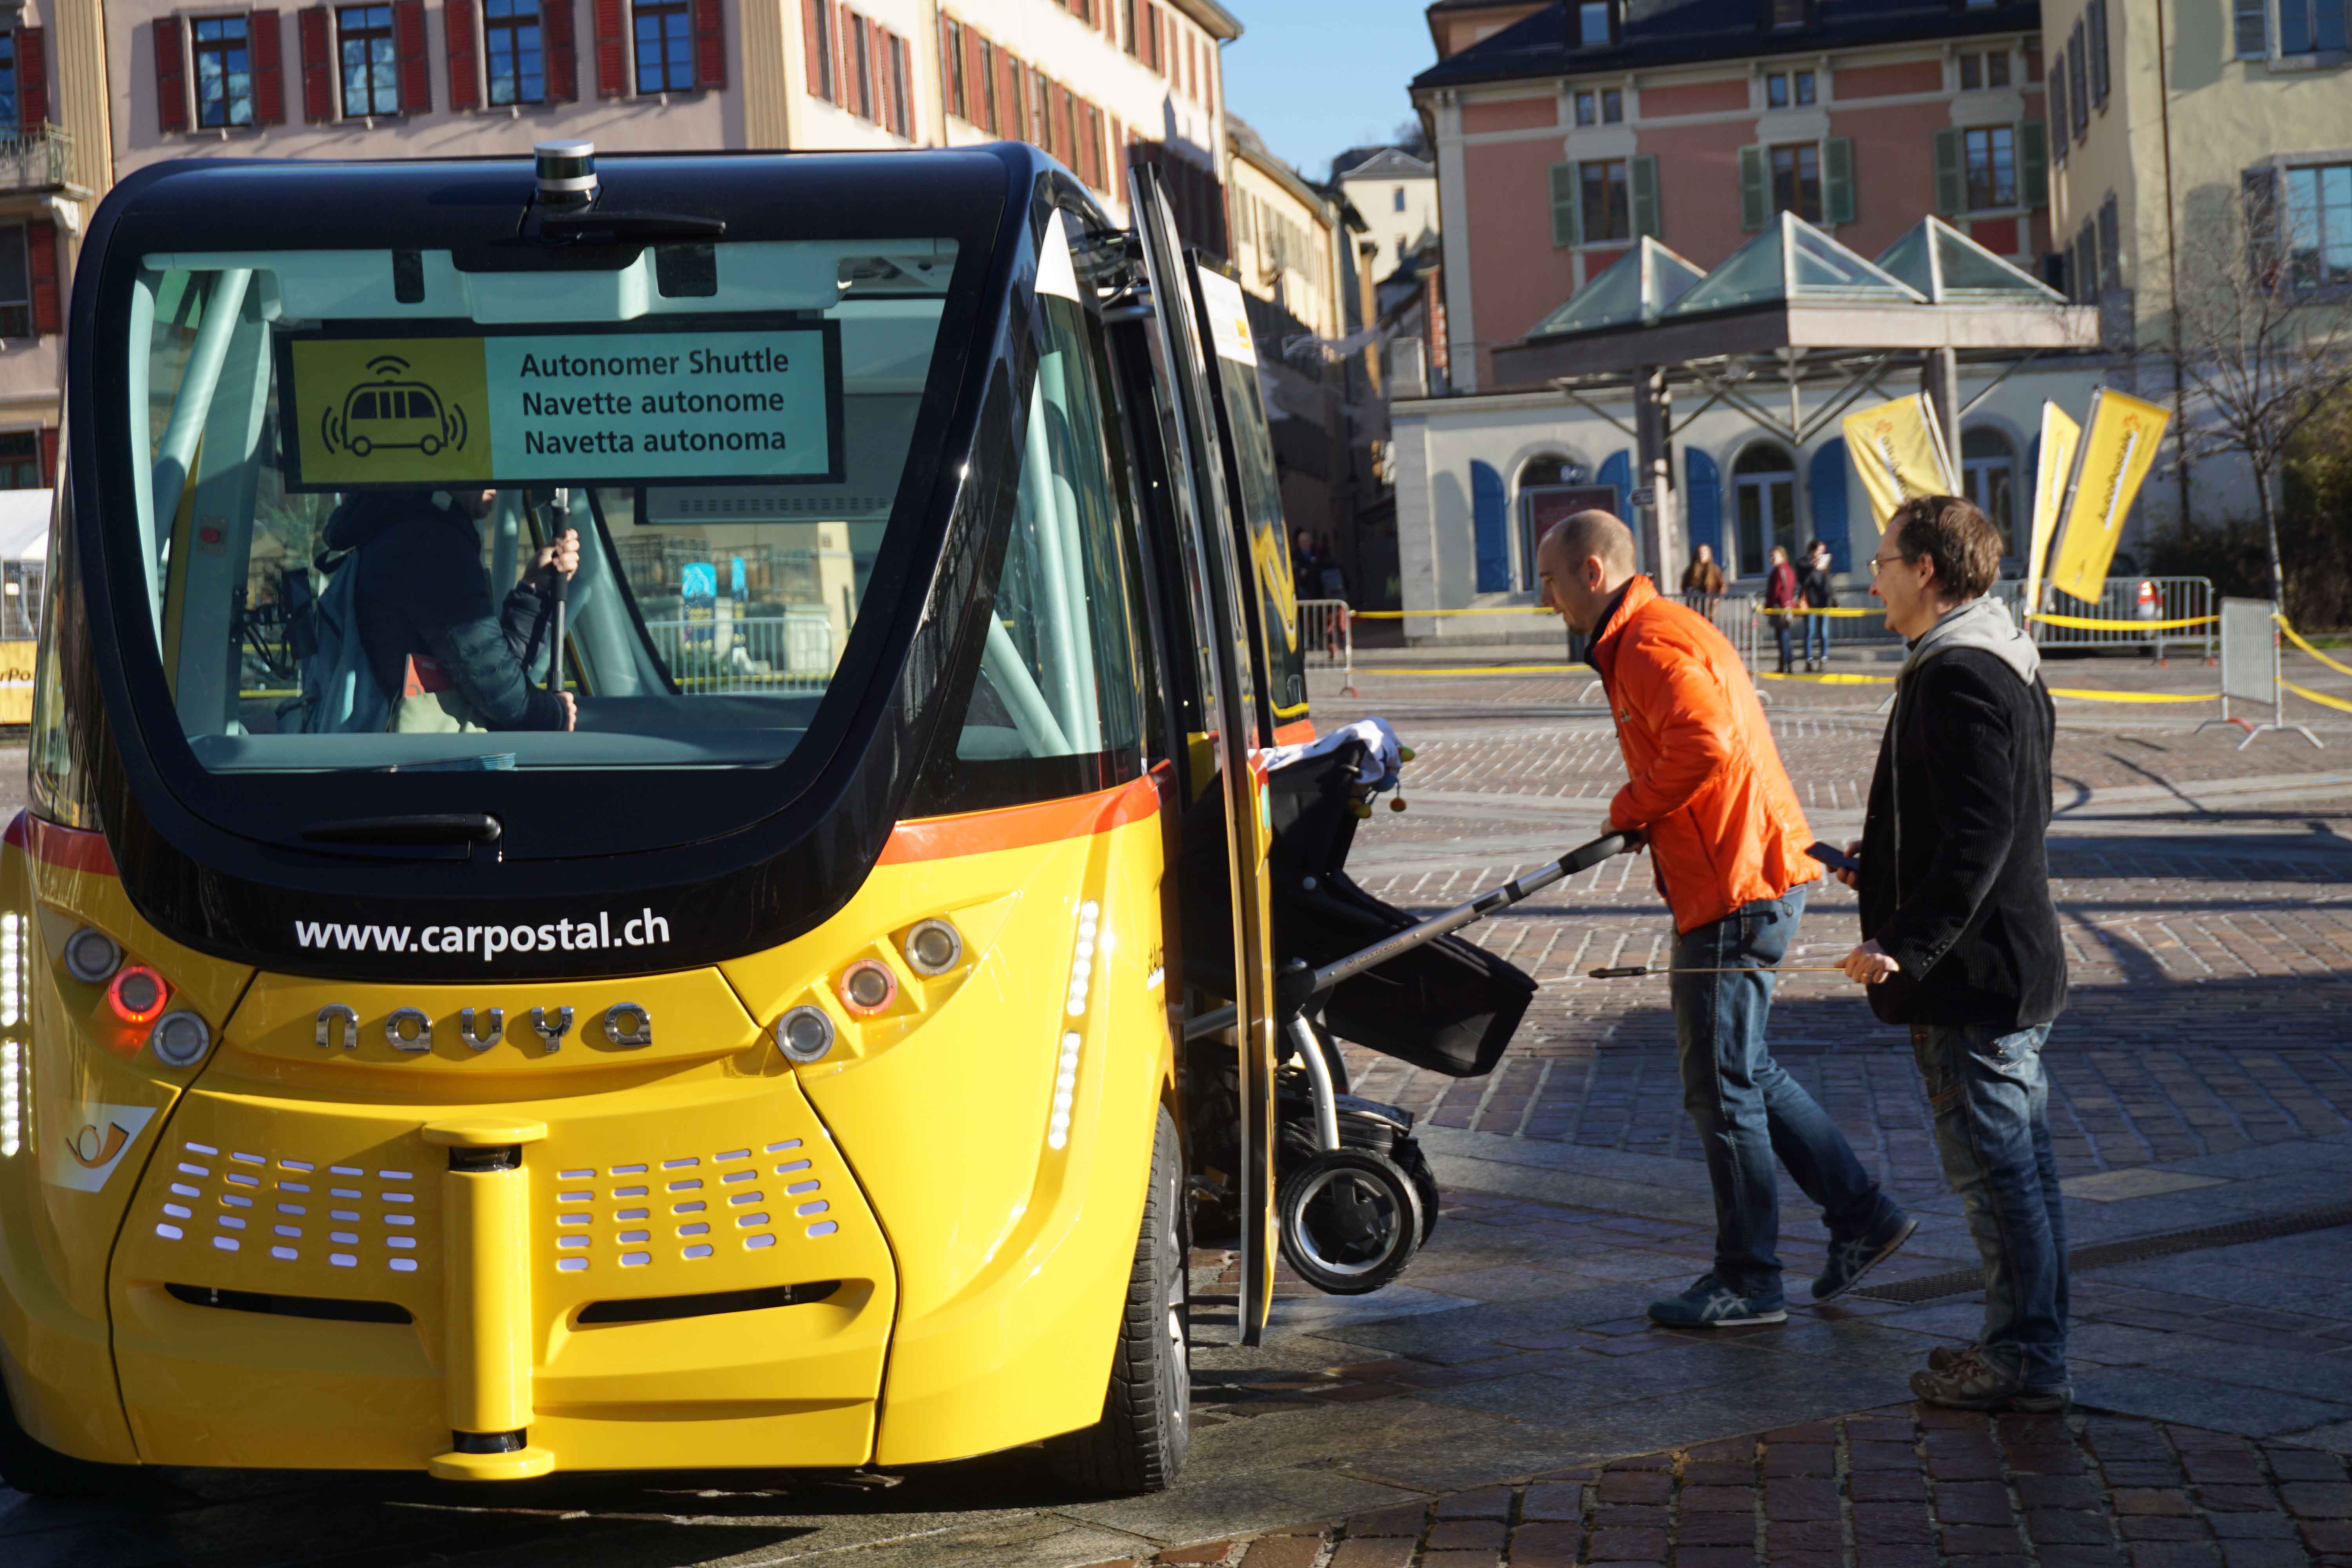 In Sion, Switzerland, passengers embark on the ARMA shuttle